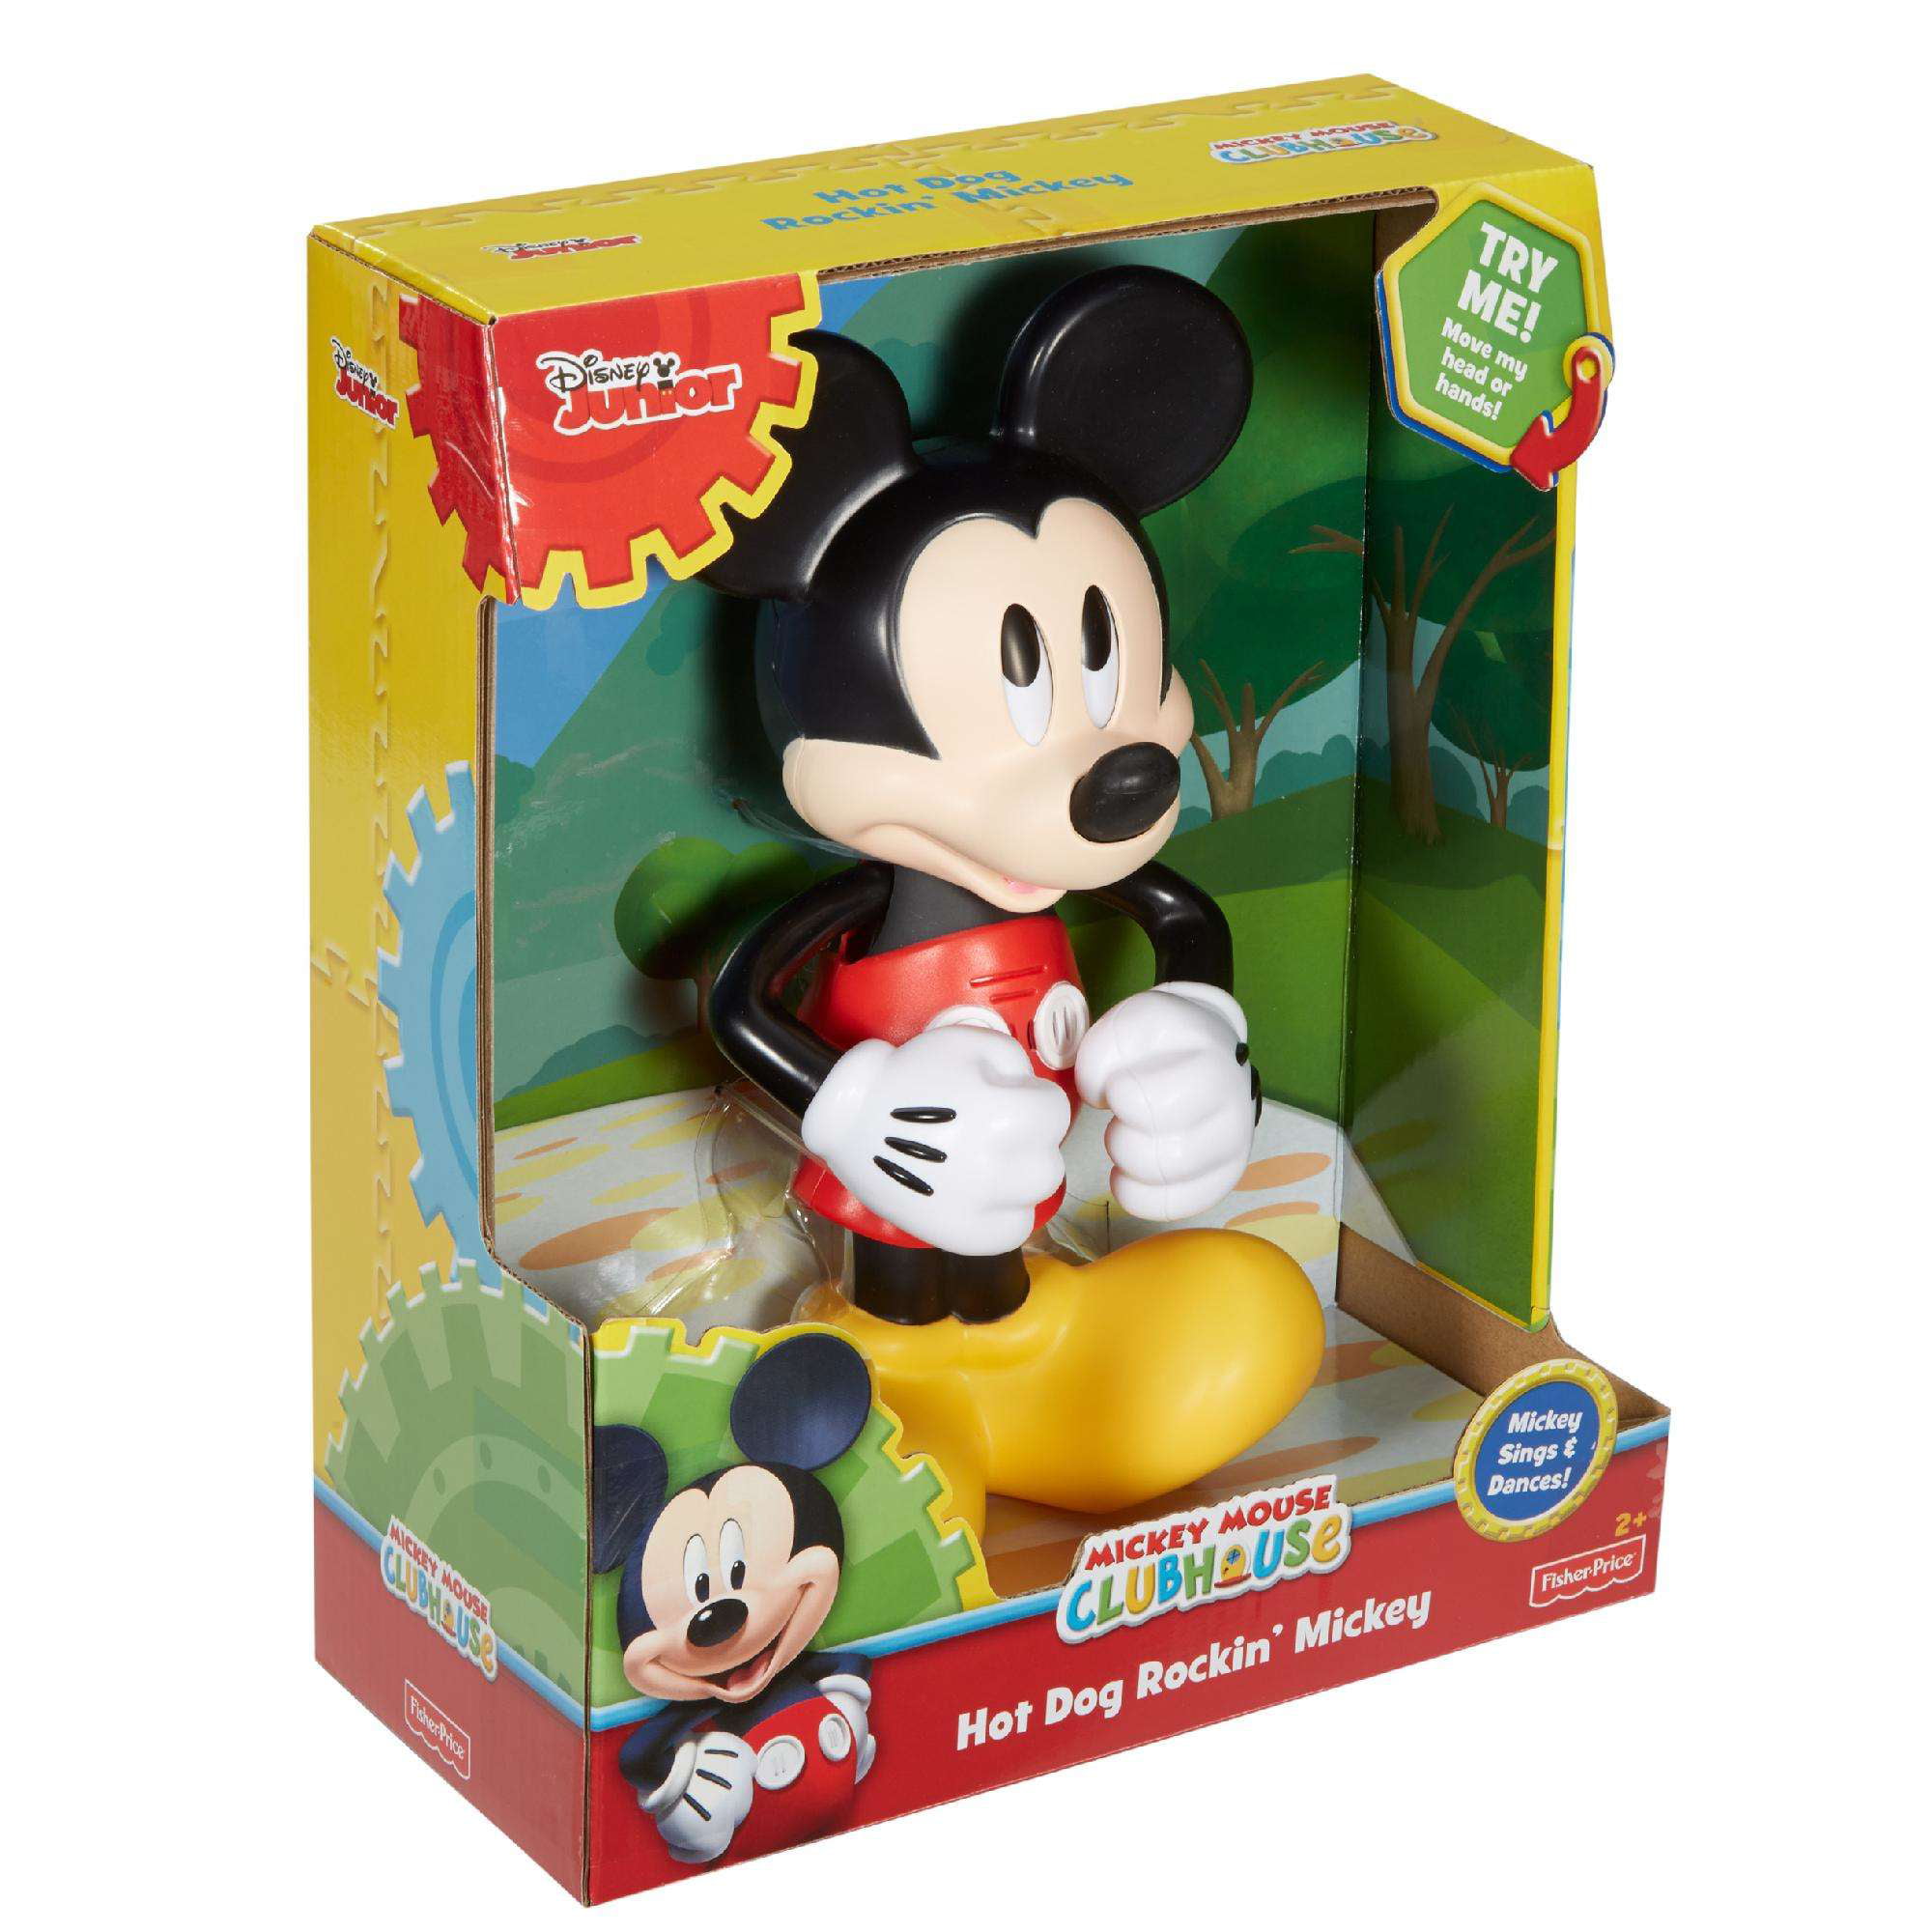 Toy 30. Fisher Price Mickey Mouse. Mickey Mouse Clubhouse Toys. Sv016 Микки. Микки Маус игрушка Озон.